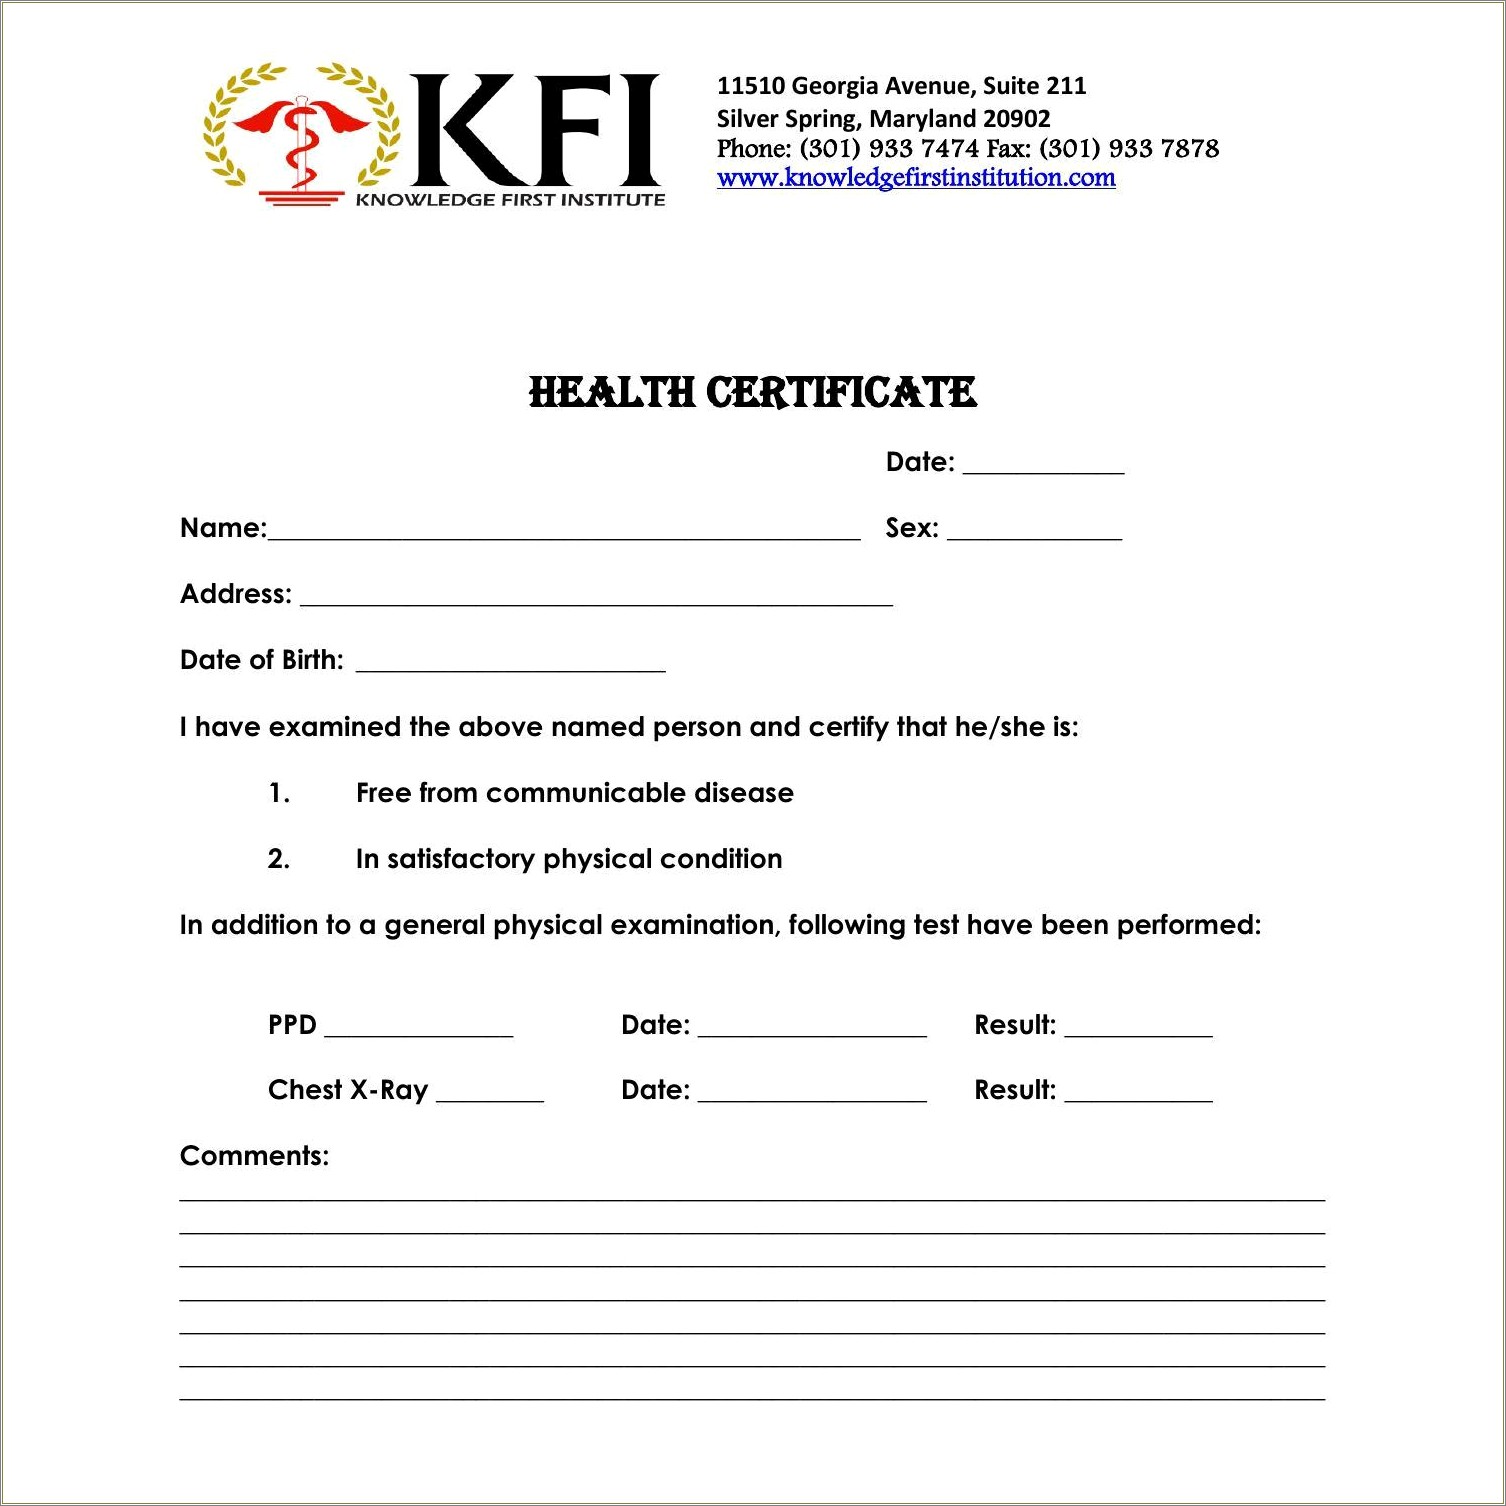 free-fake-medical-certificate-template-pdf-resume-example-gallery